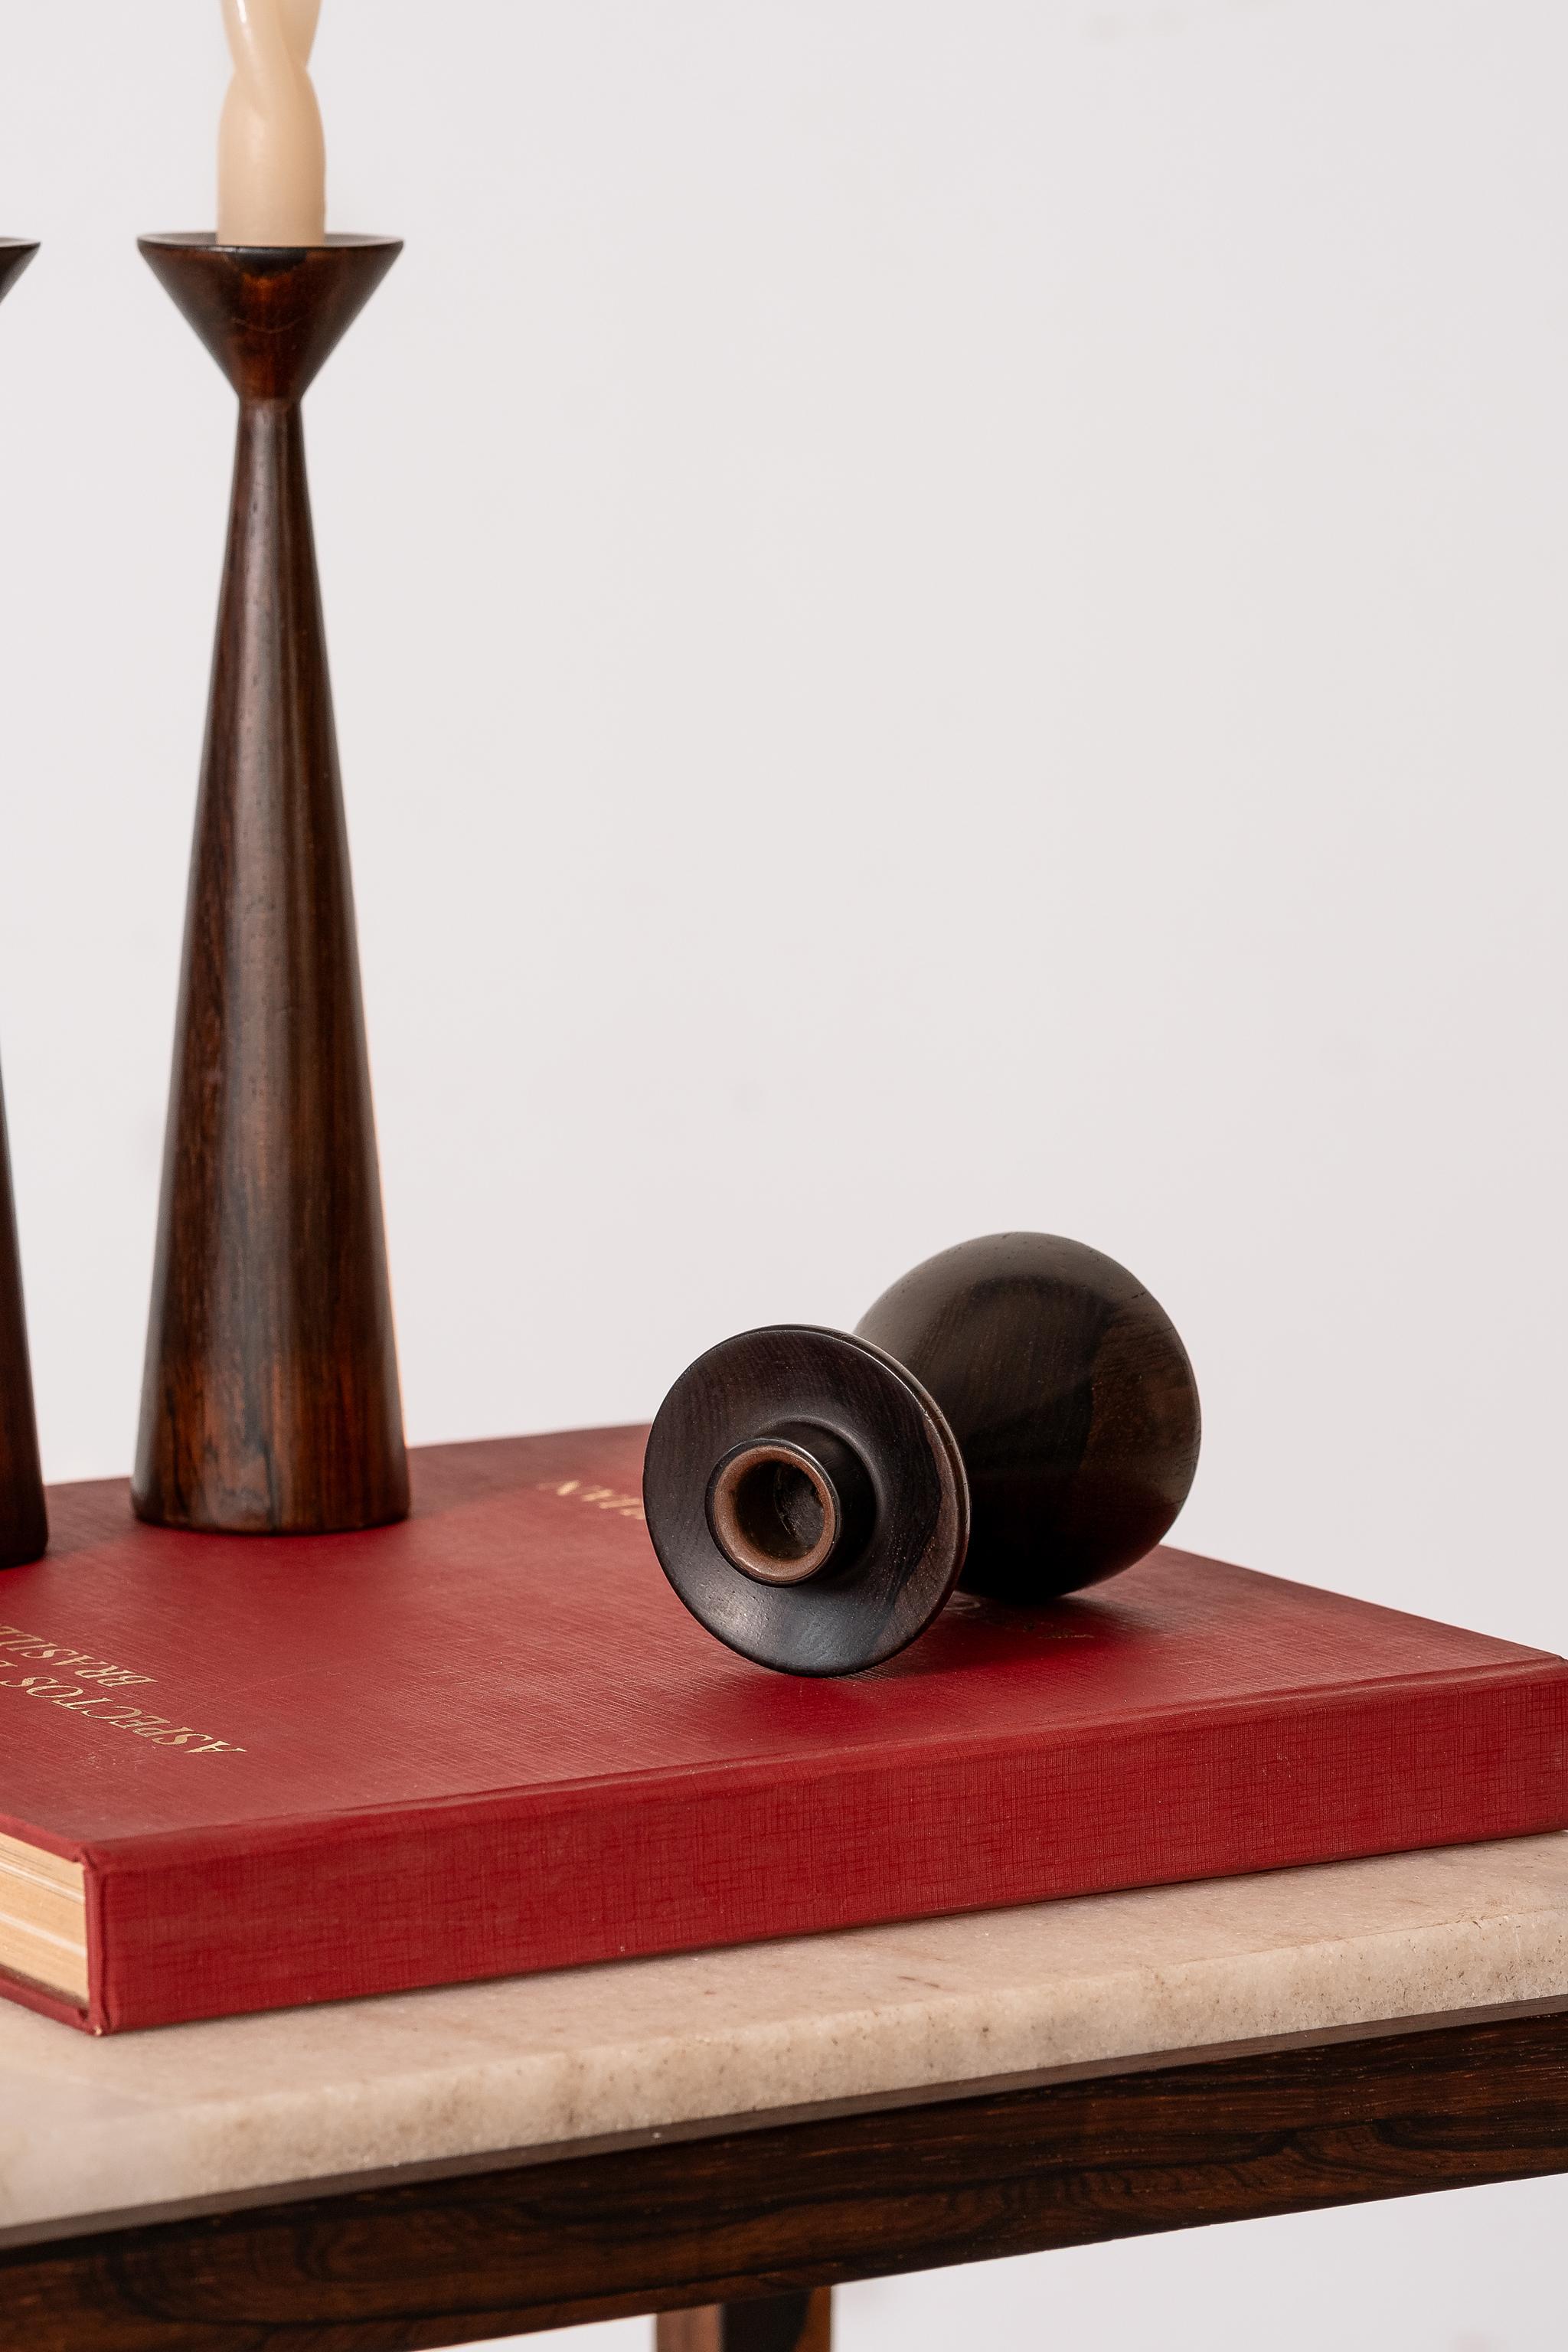 Woodwork Brazilian Midcentury Candlestick in Rosewood by Casa Finland, c. 1970 For Sale